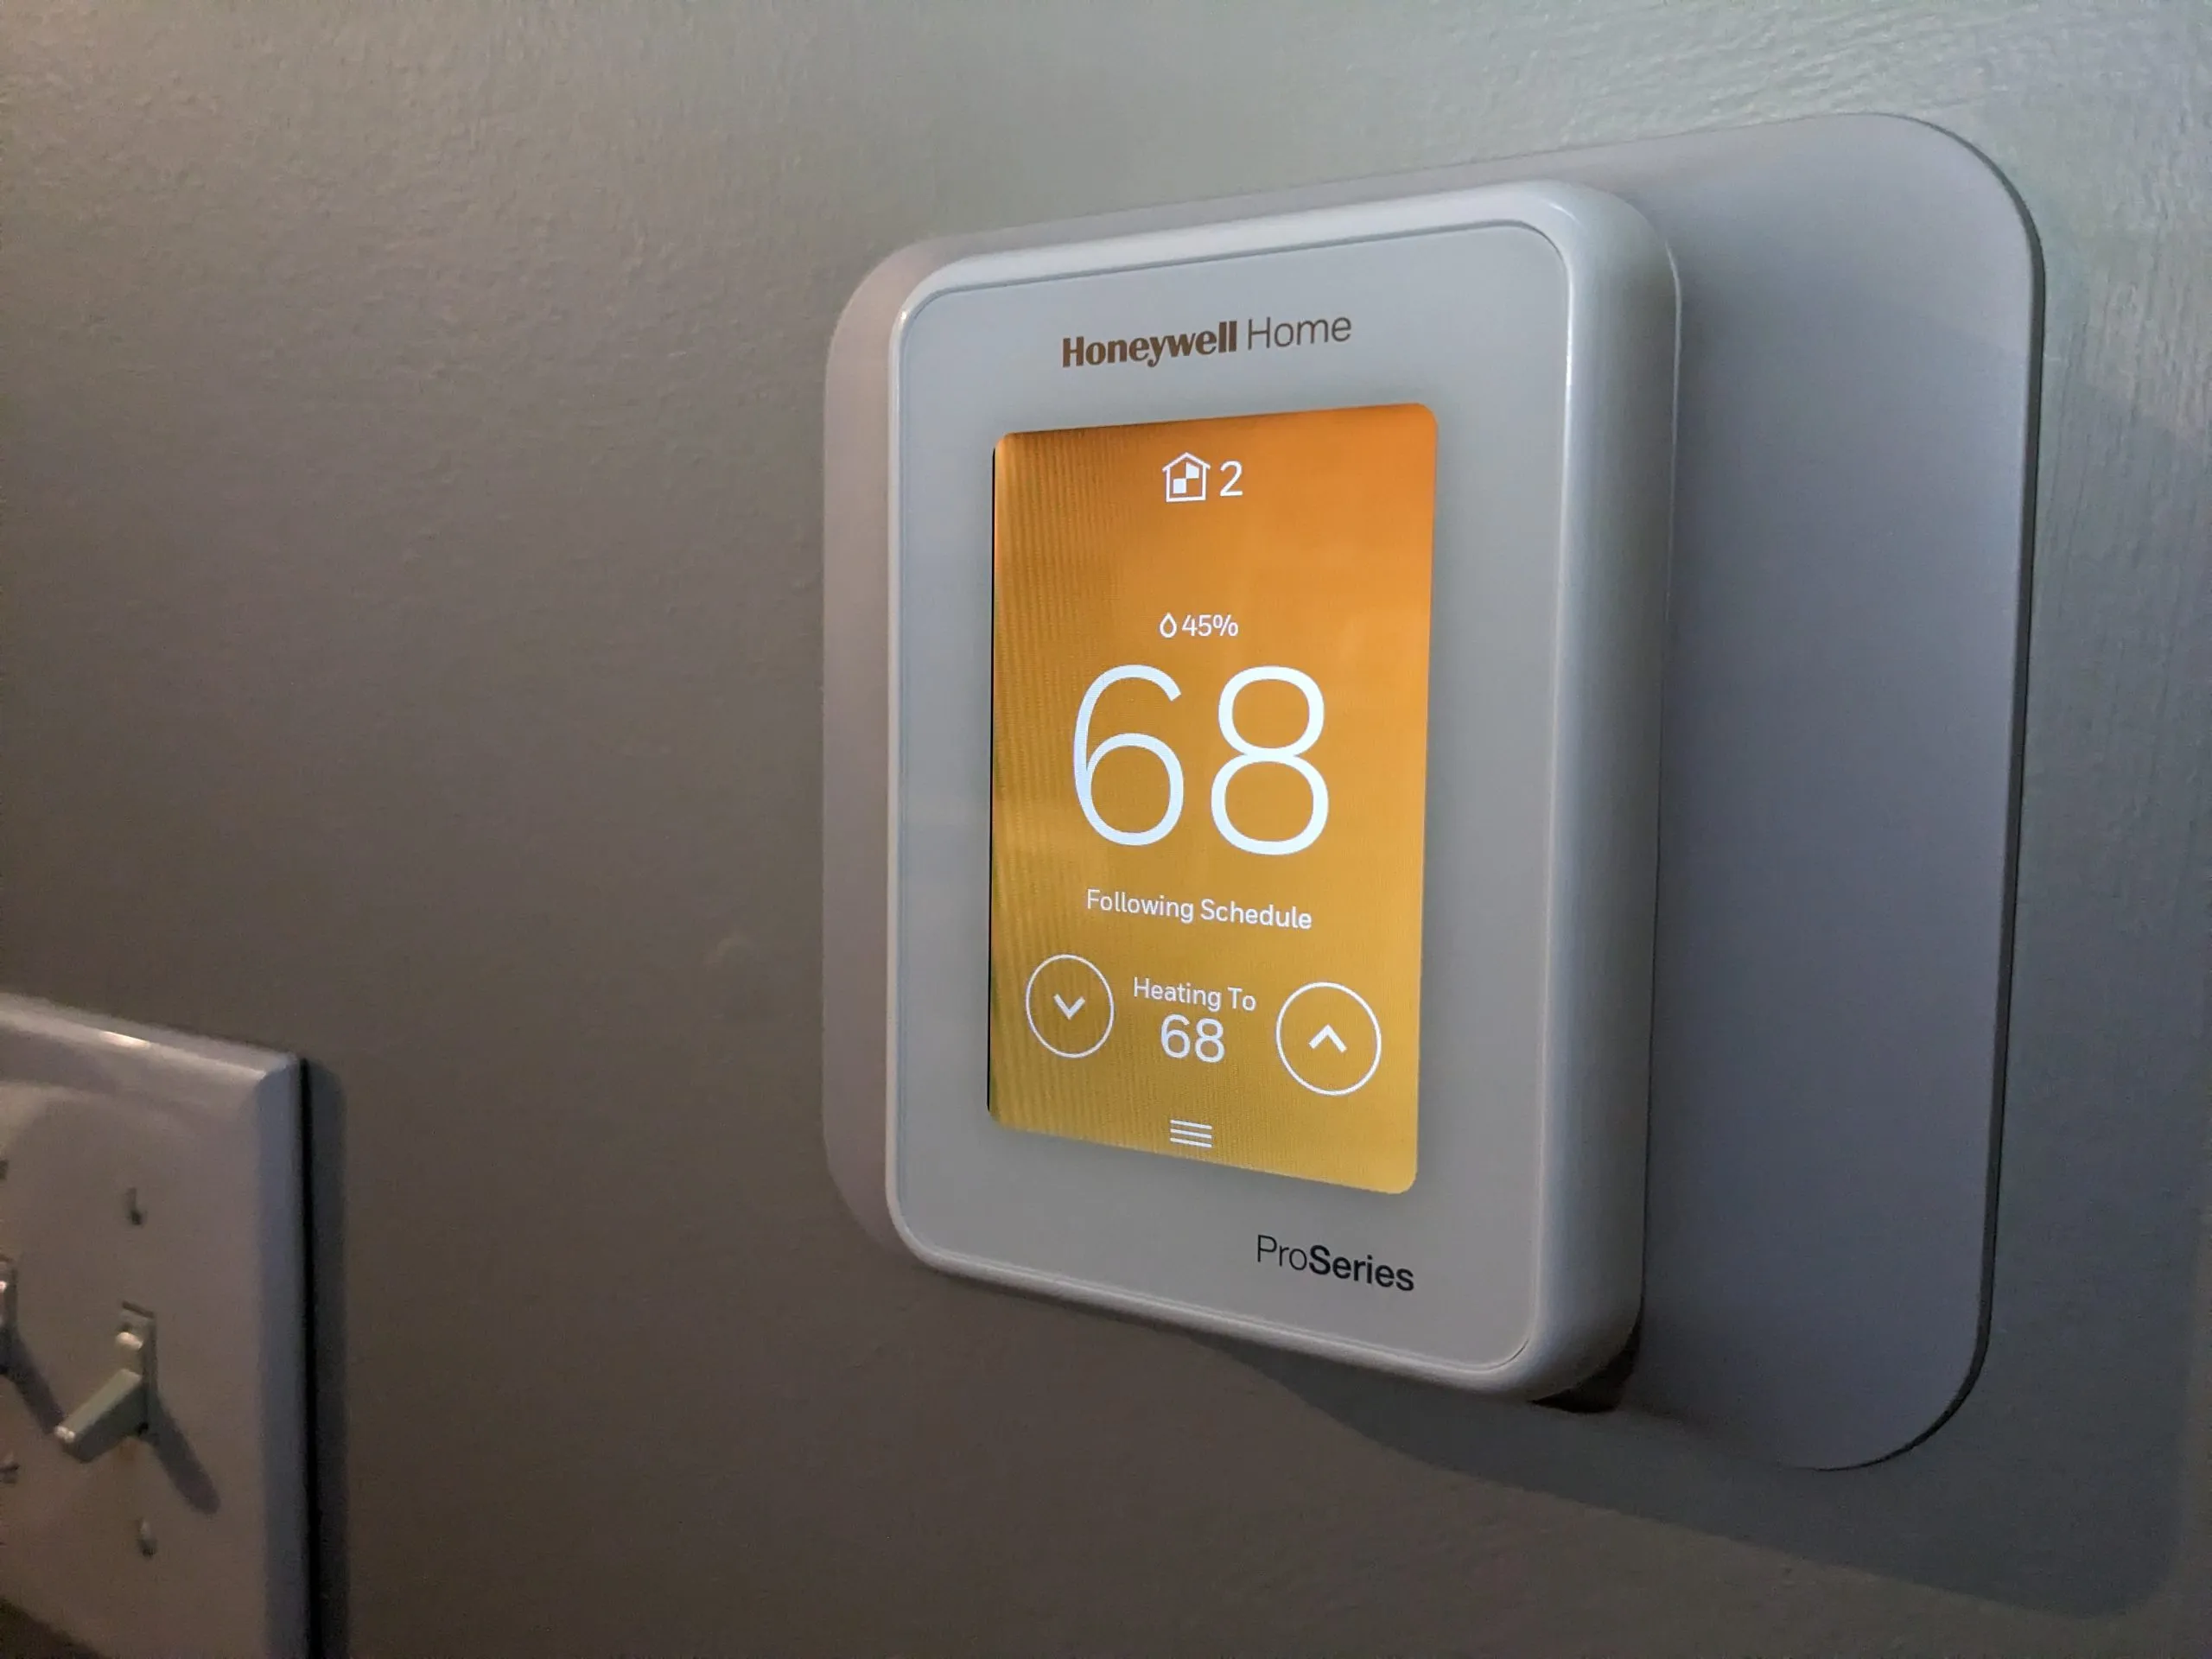 What Is The Latest Model Of Honeywell Smart Thermostat